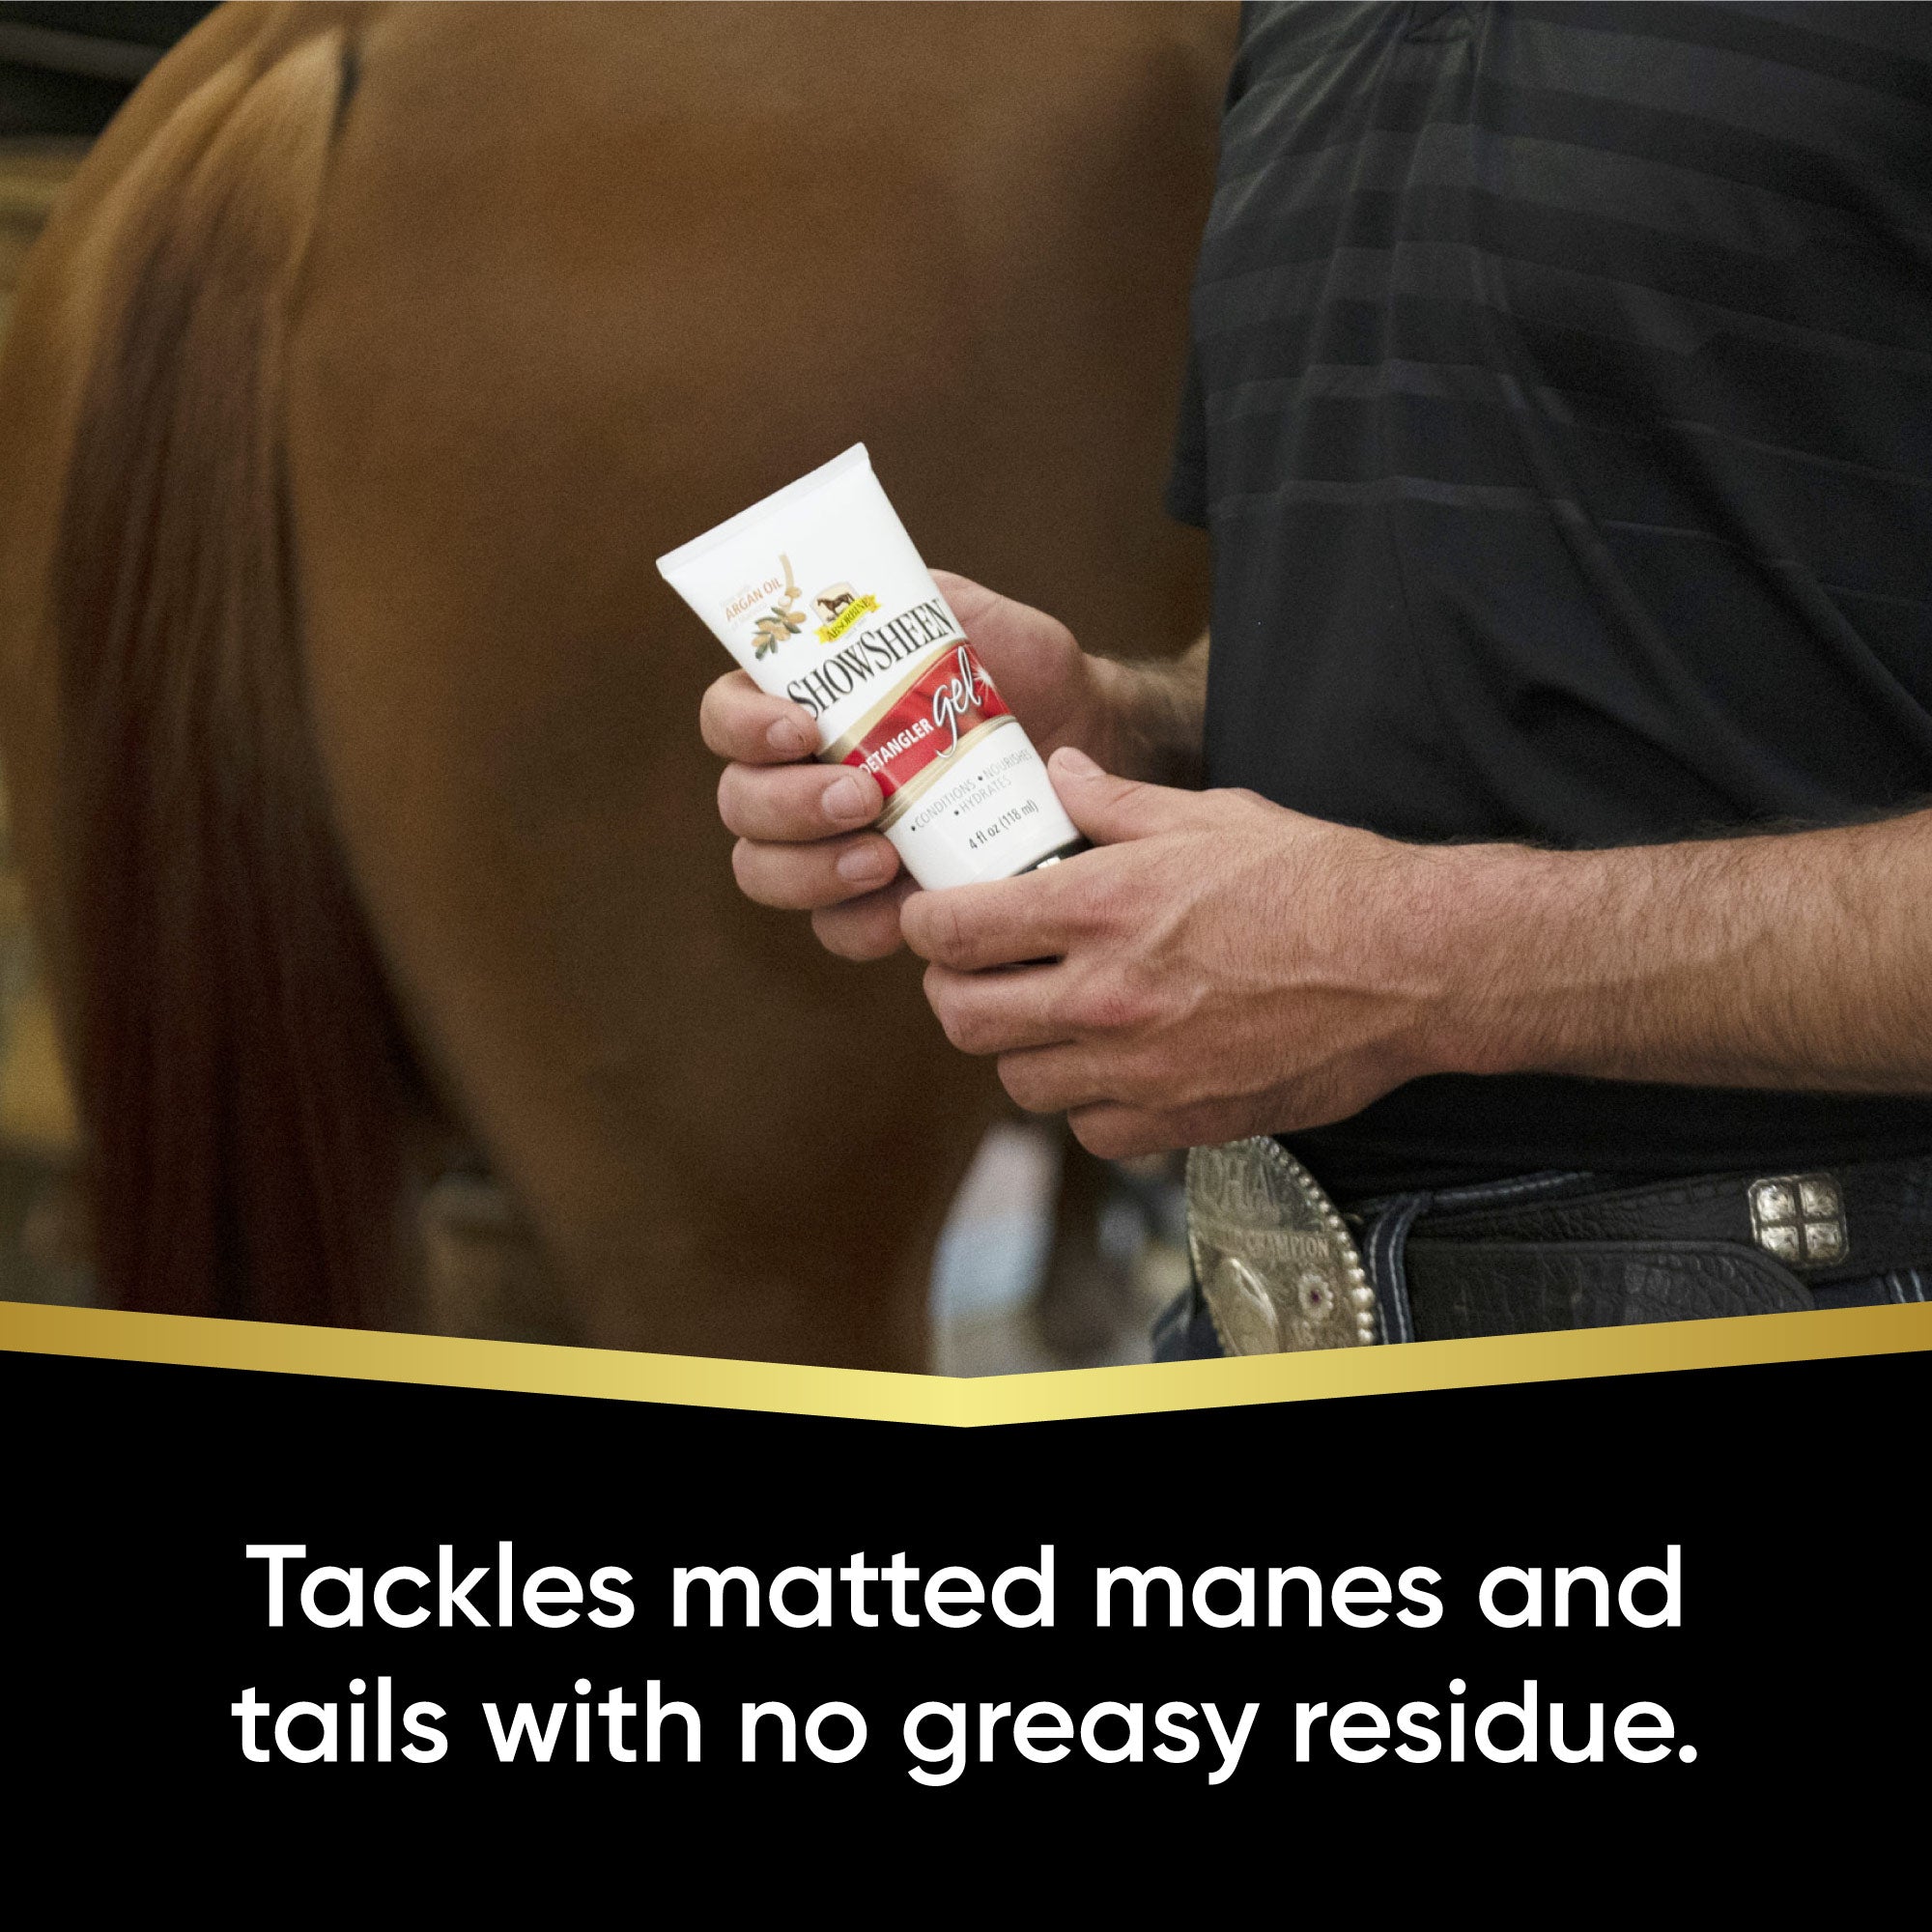 Man holding a tube of Showsheen detangler gel approaching a brown horse's tail.  Tackles matted manes and tails with no greasy residue.